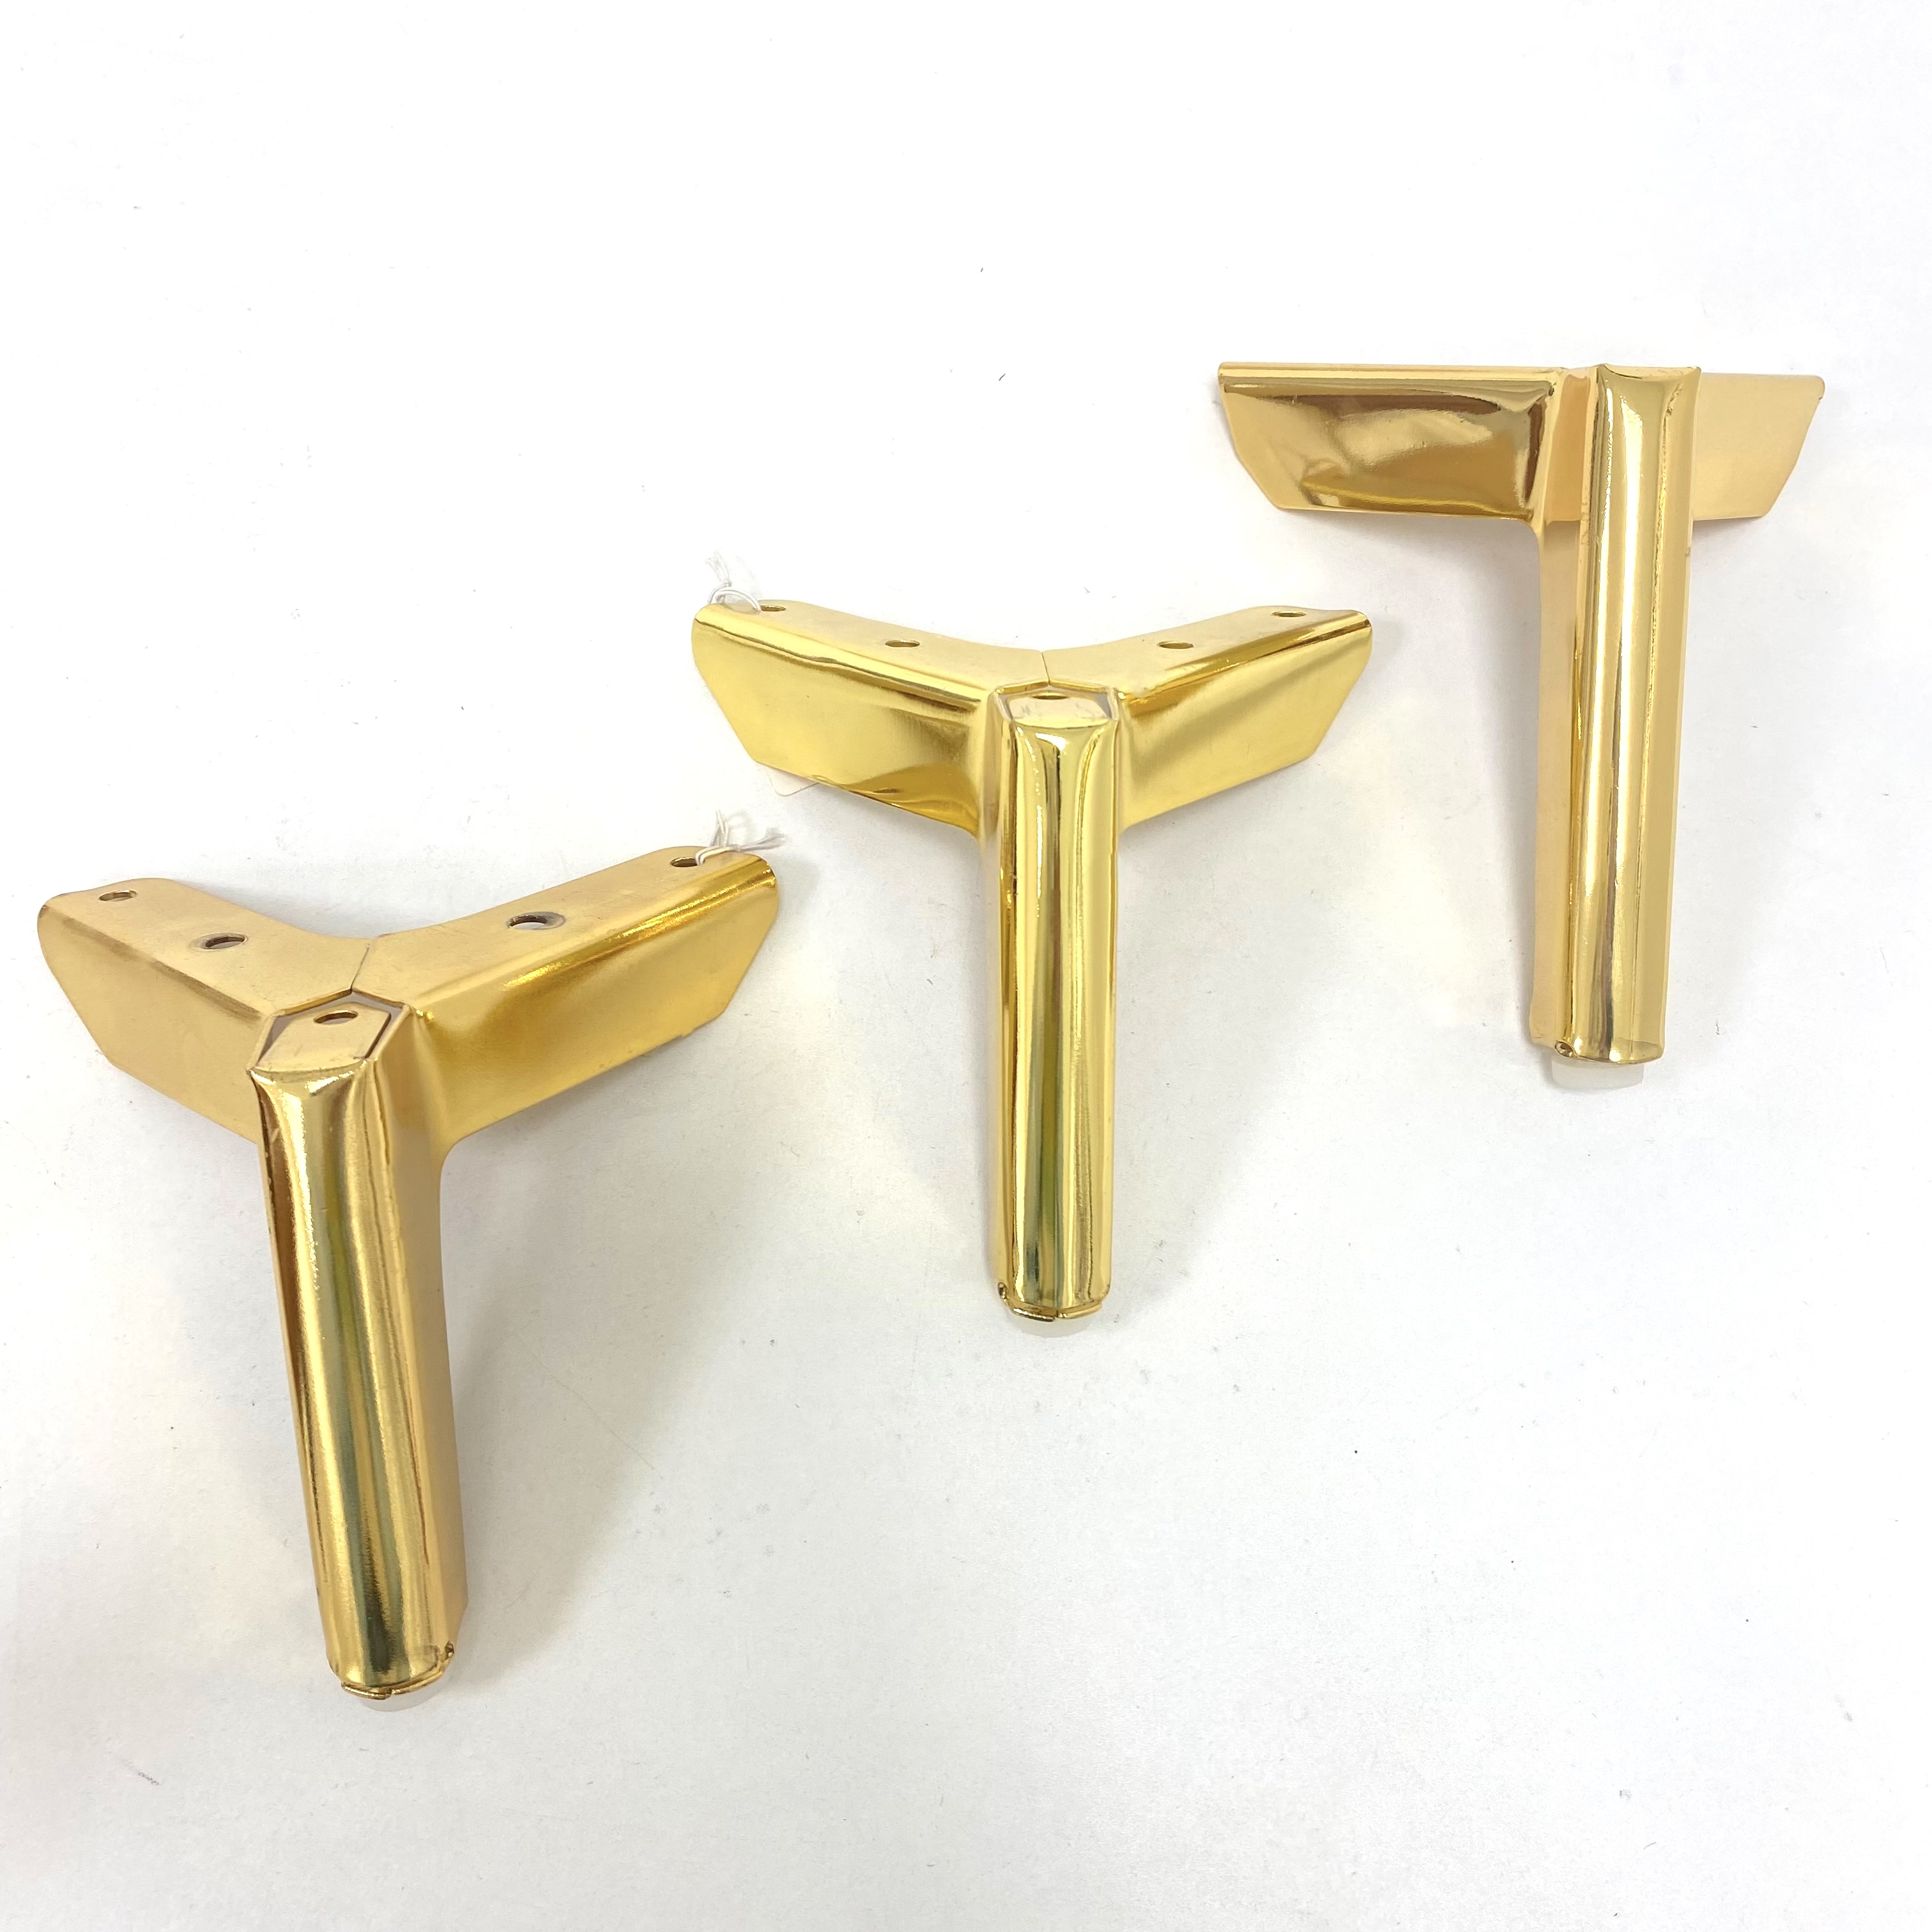 Gold Triangle Cabinet Feet And Replacement Furniture Legs